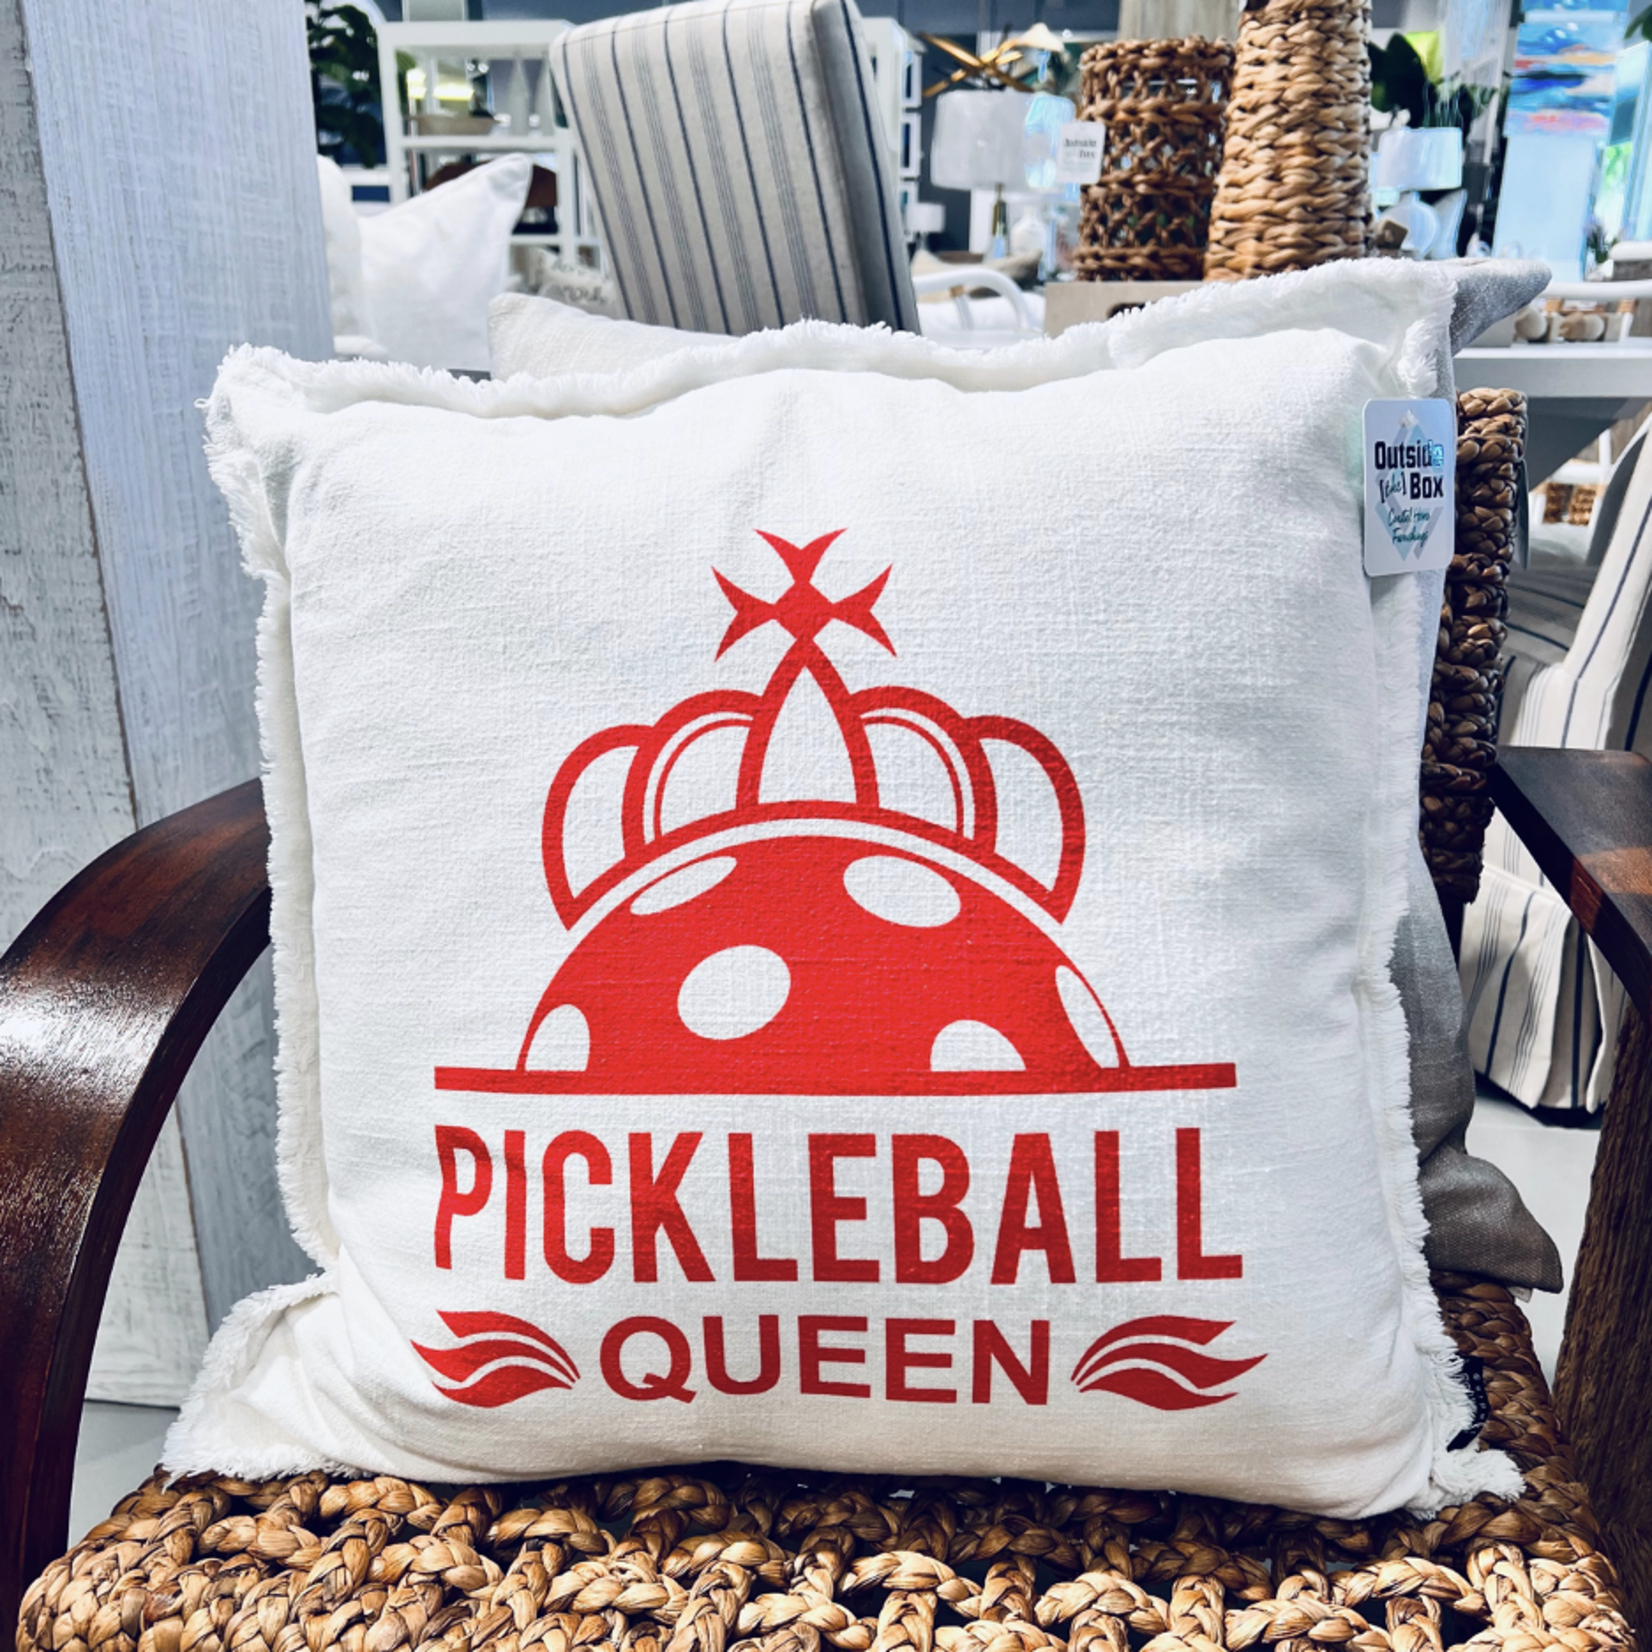 Outside The Box 20x20 "Pickleball Queen" White Fringed Linen/Cotton Pillow